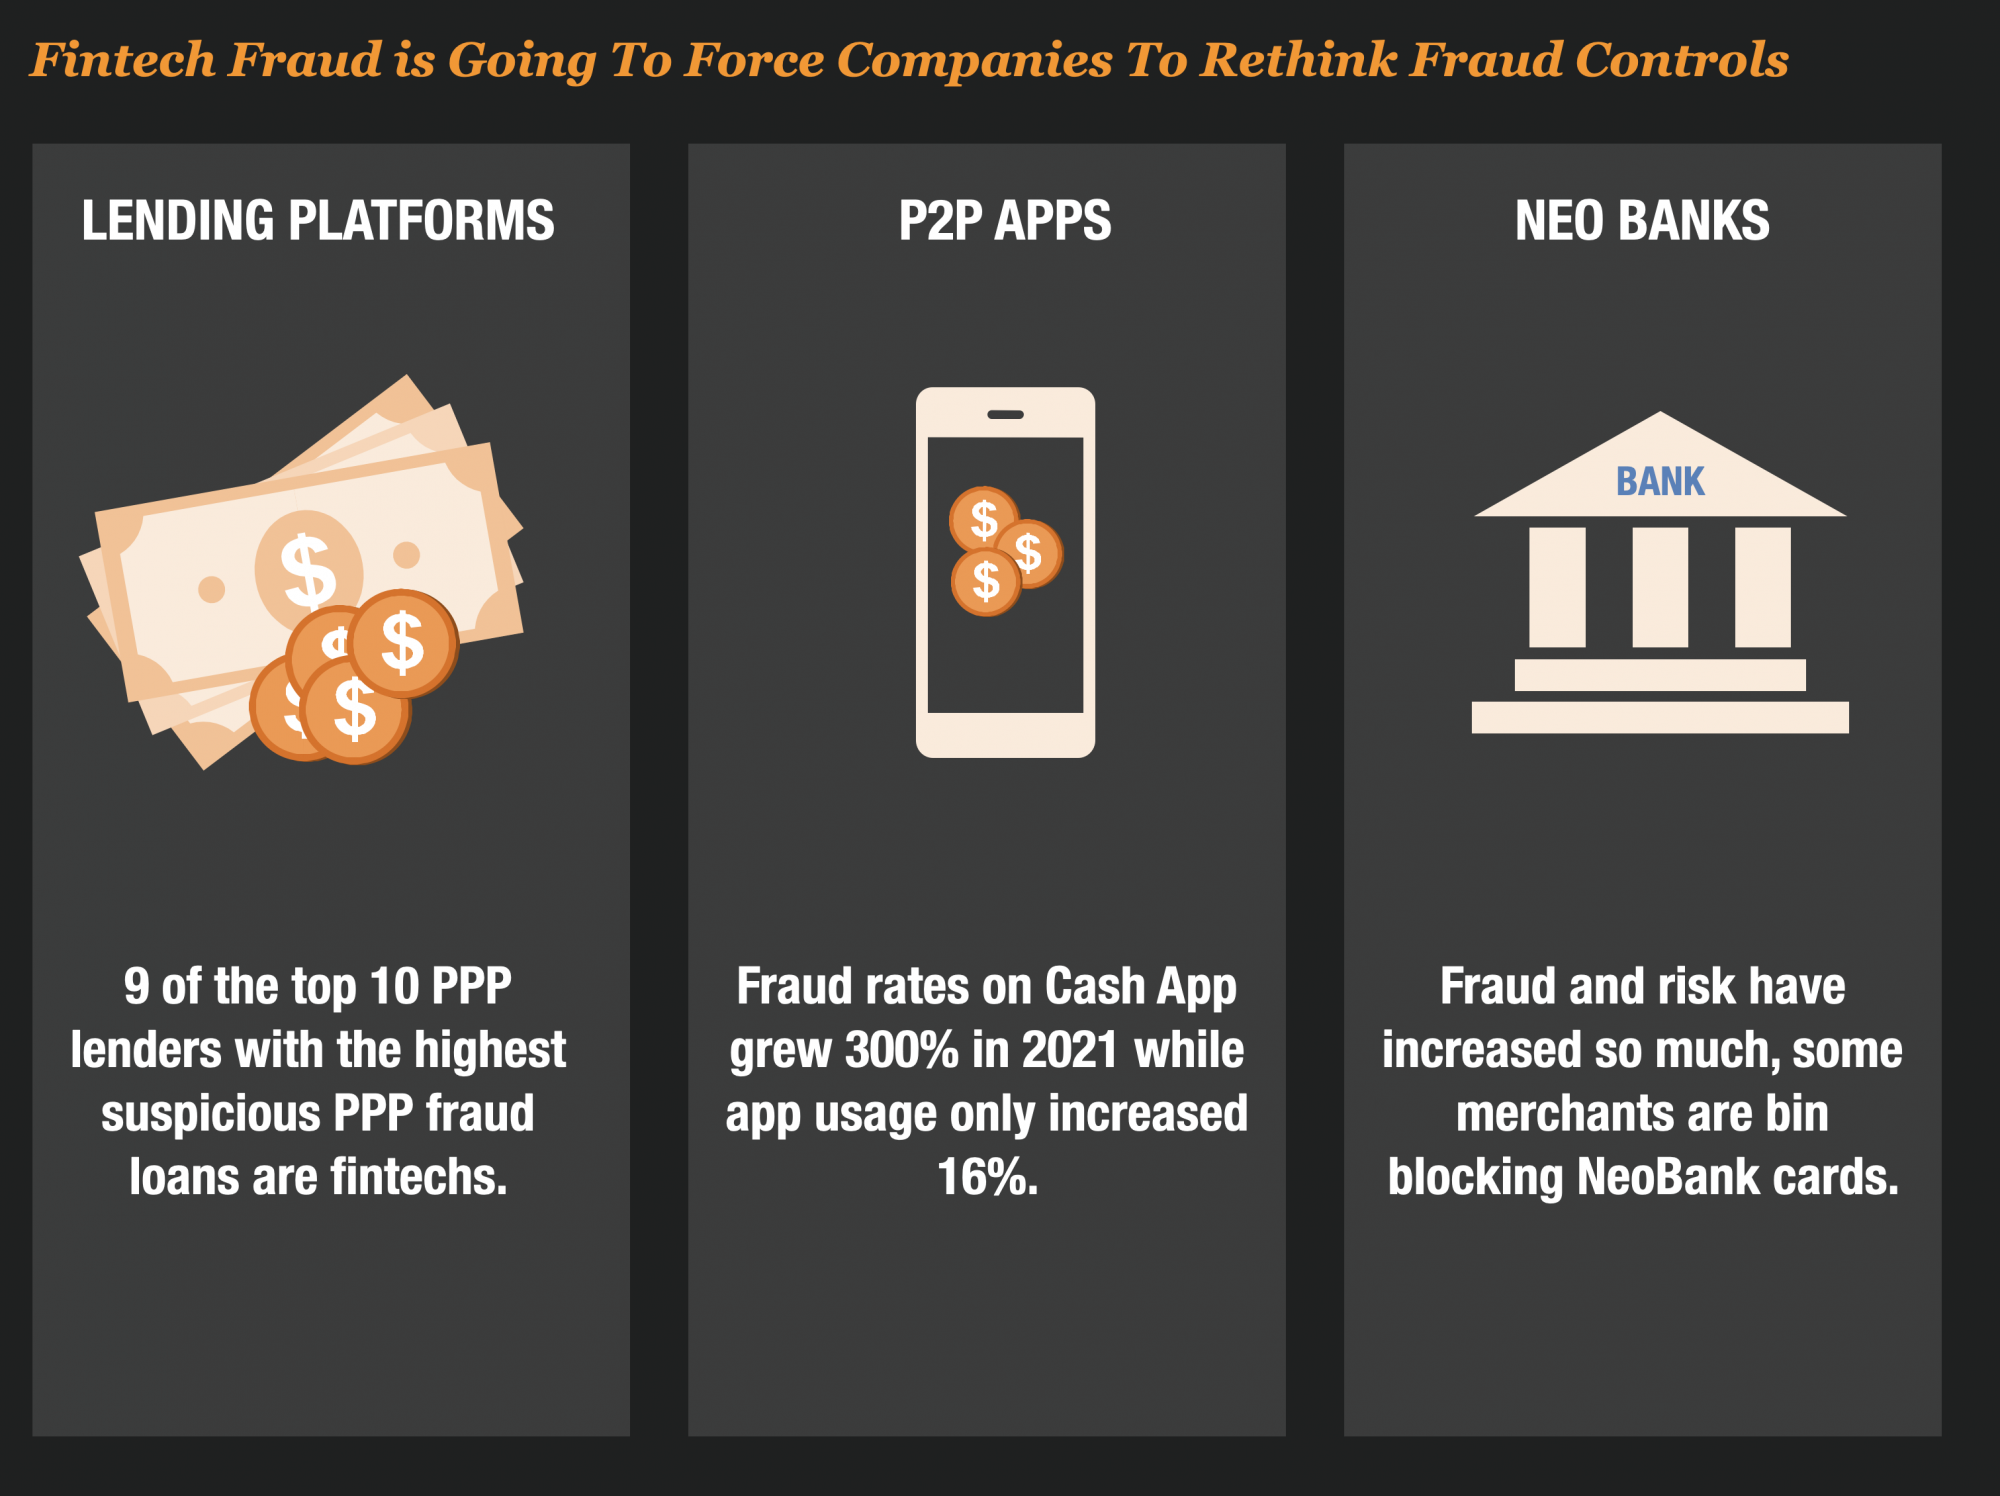 Prediction 3 – Extent of Fintech Fraud Comes To Light and Forces More Prudent Controls